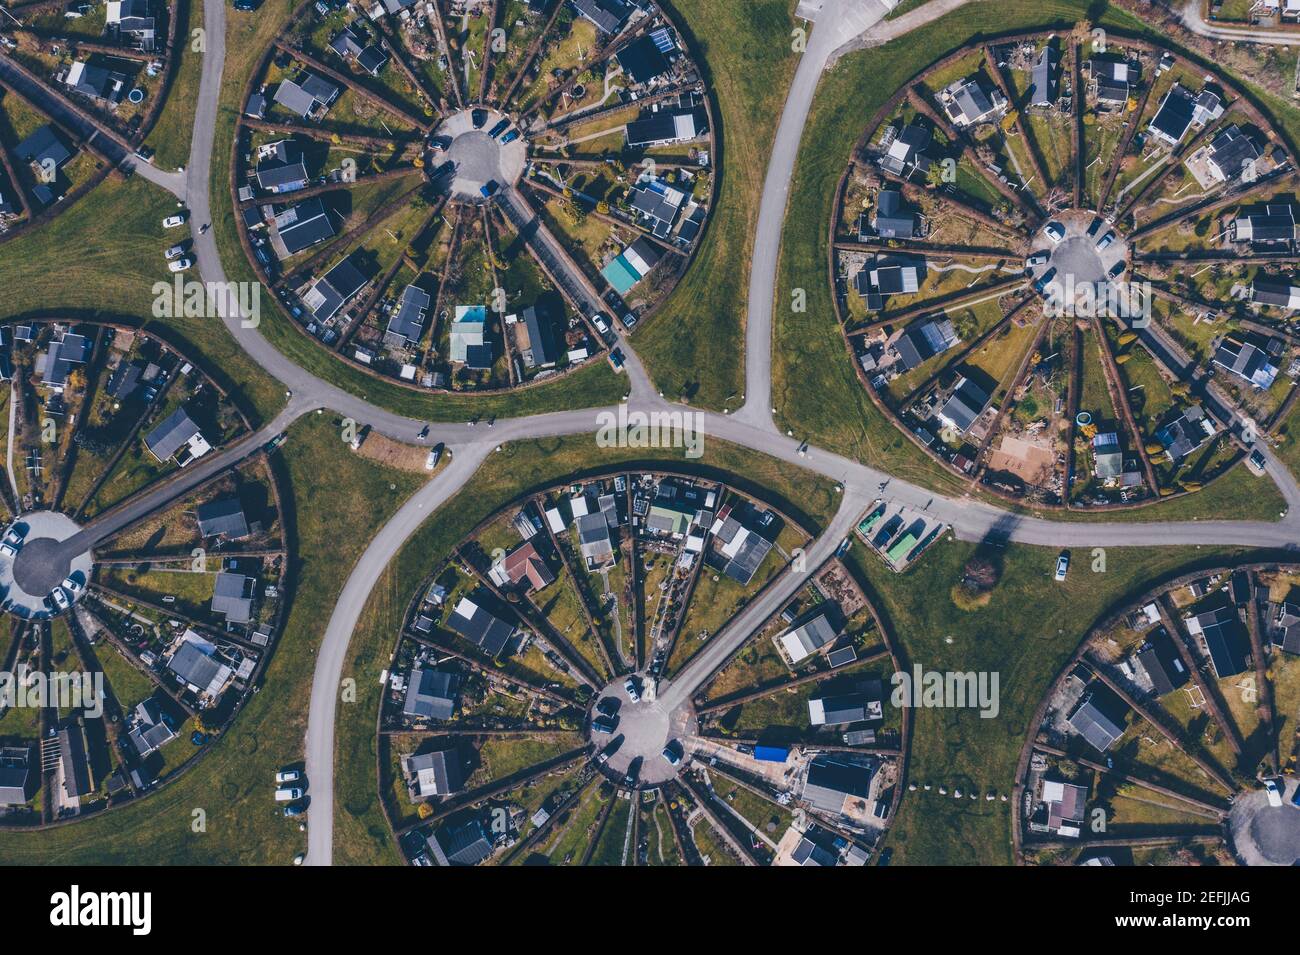 Brøndby, Denmark. 05th, April 2020. The circle formed allotment gardens Brøndby Haveby. The complex is designed by the Danish landscape architect Erik Mygind. Stock Photo